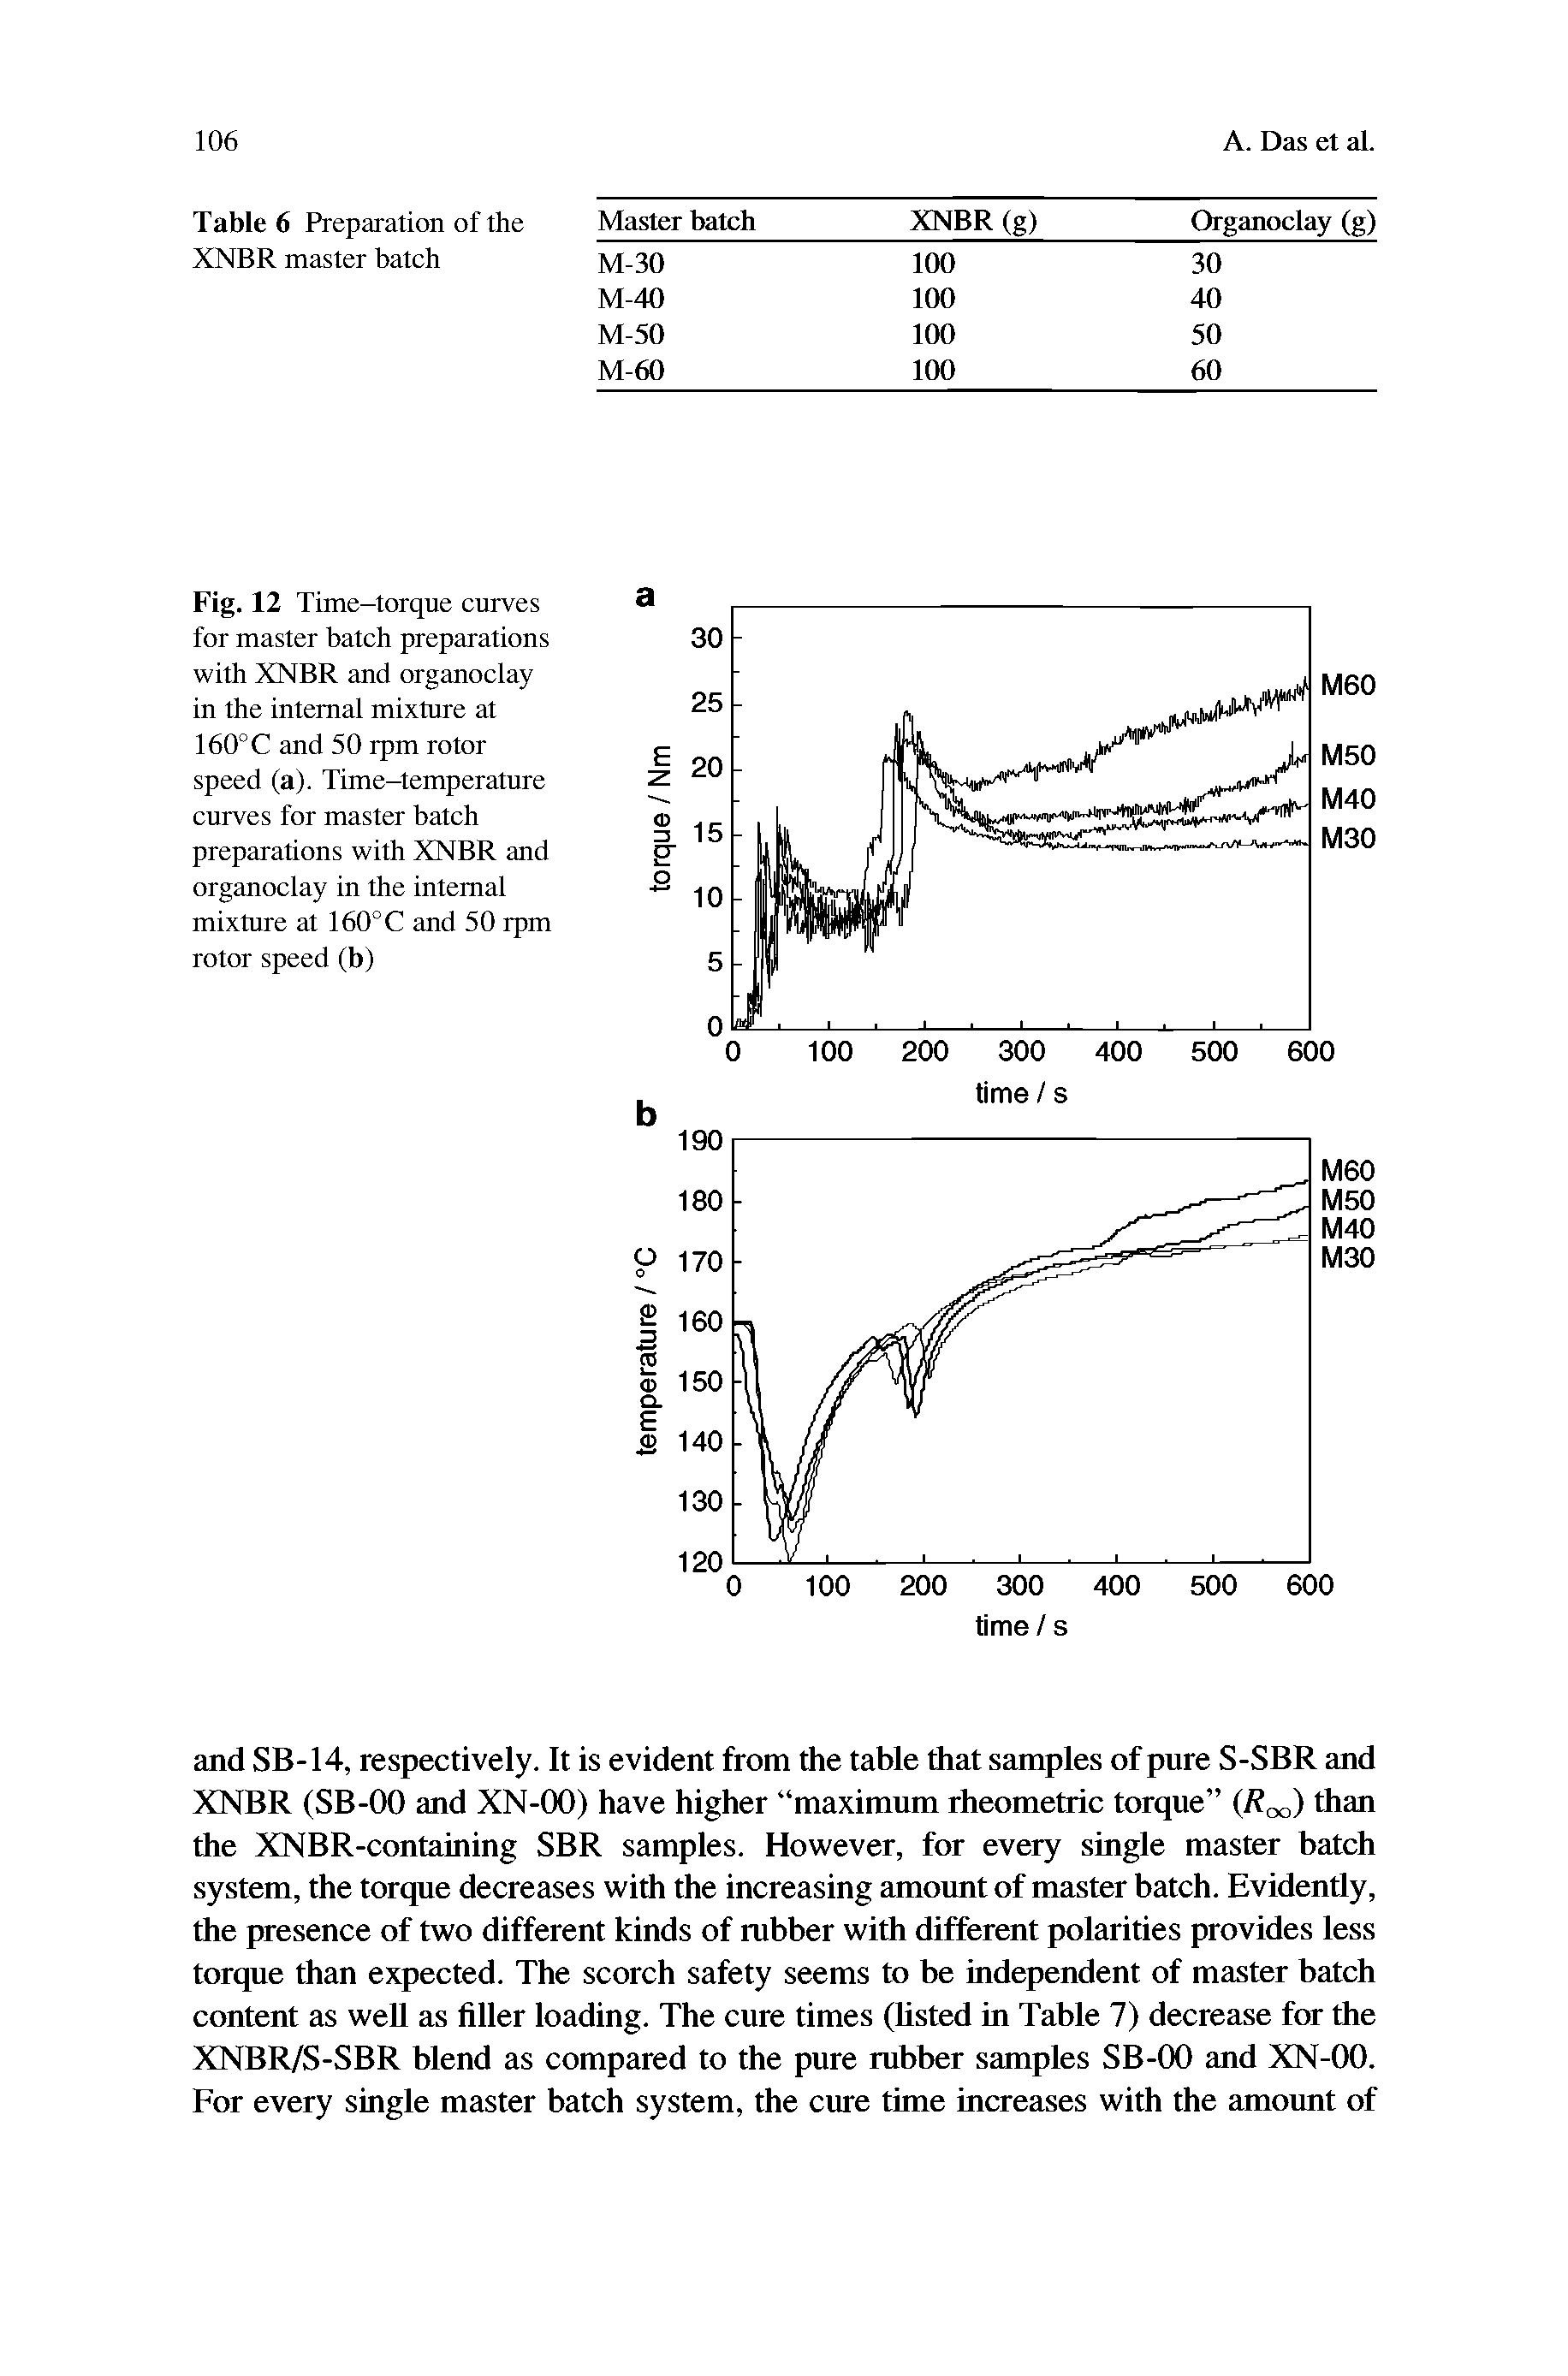 Fig. 12 Time-torque curves for master batch preparations with XNBR and organoclay in the internal mixture at 160°C and 50 rpm rotor speed (a). Time-temperature curves for master batch preparations with XNBR and organoclay in the internal mixture at 160°C and 50 rpm rotor speed (b)...